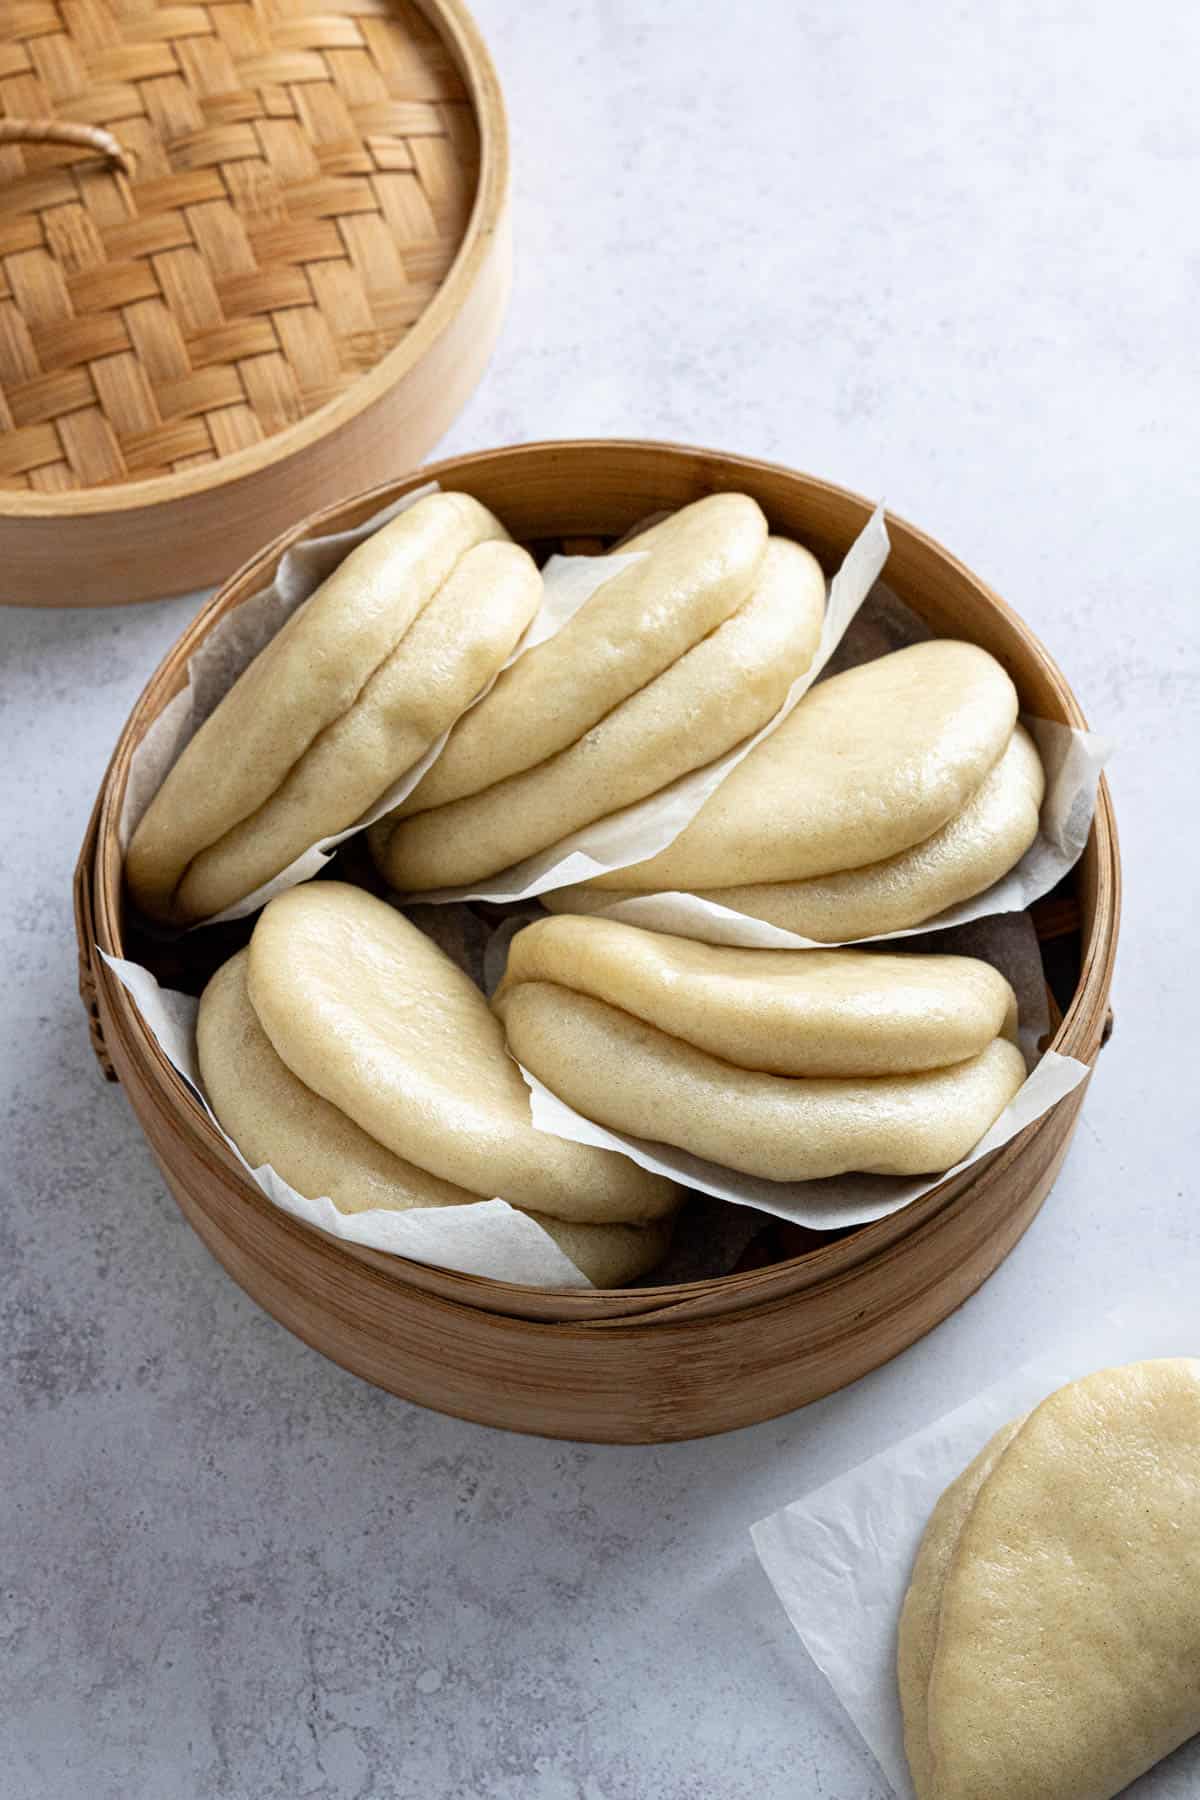 A pile of bao buns in a bamboo steamer.